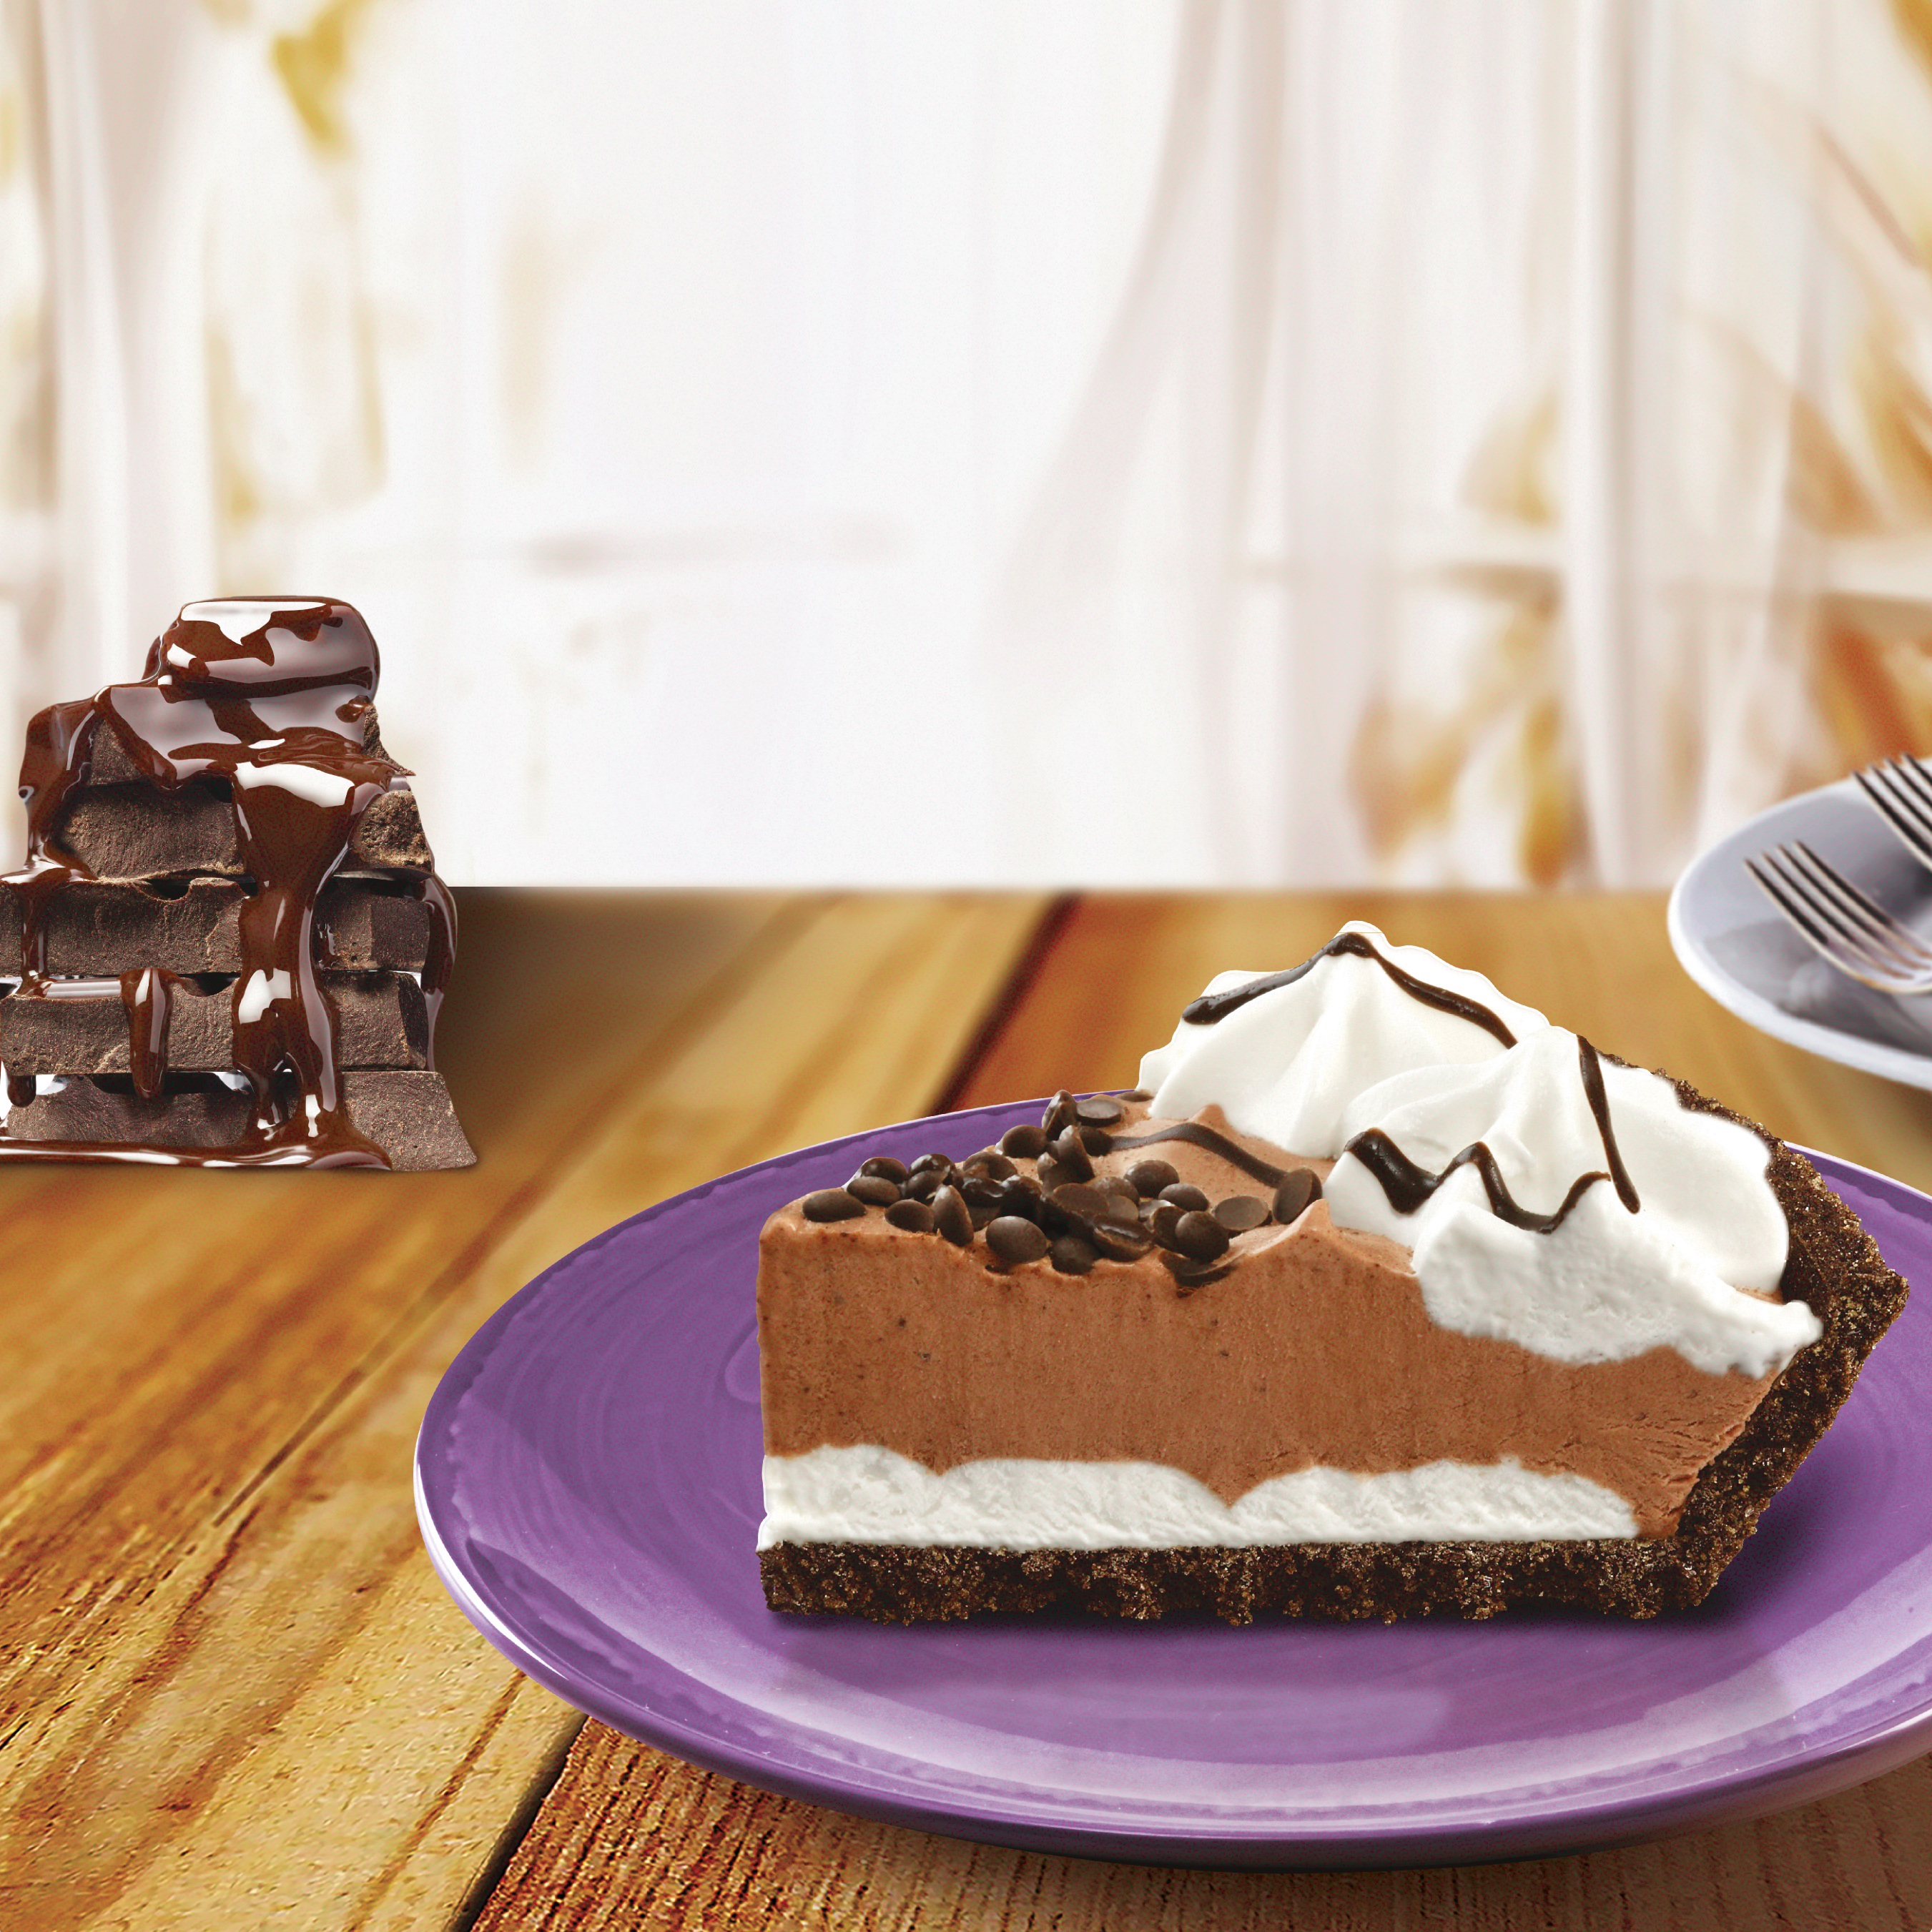 Great Value Chocolate Creme Pie, Frozen Dessert, 25.5 oz, Made with Real Chocolate, No HFCS, Box (Frozen) - image 3 of 5